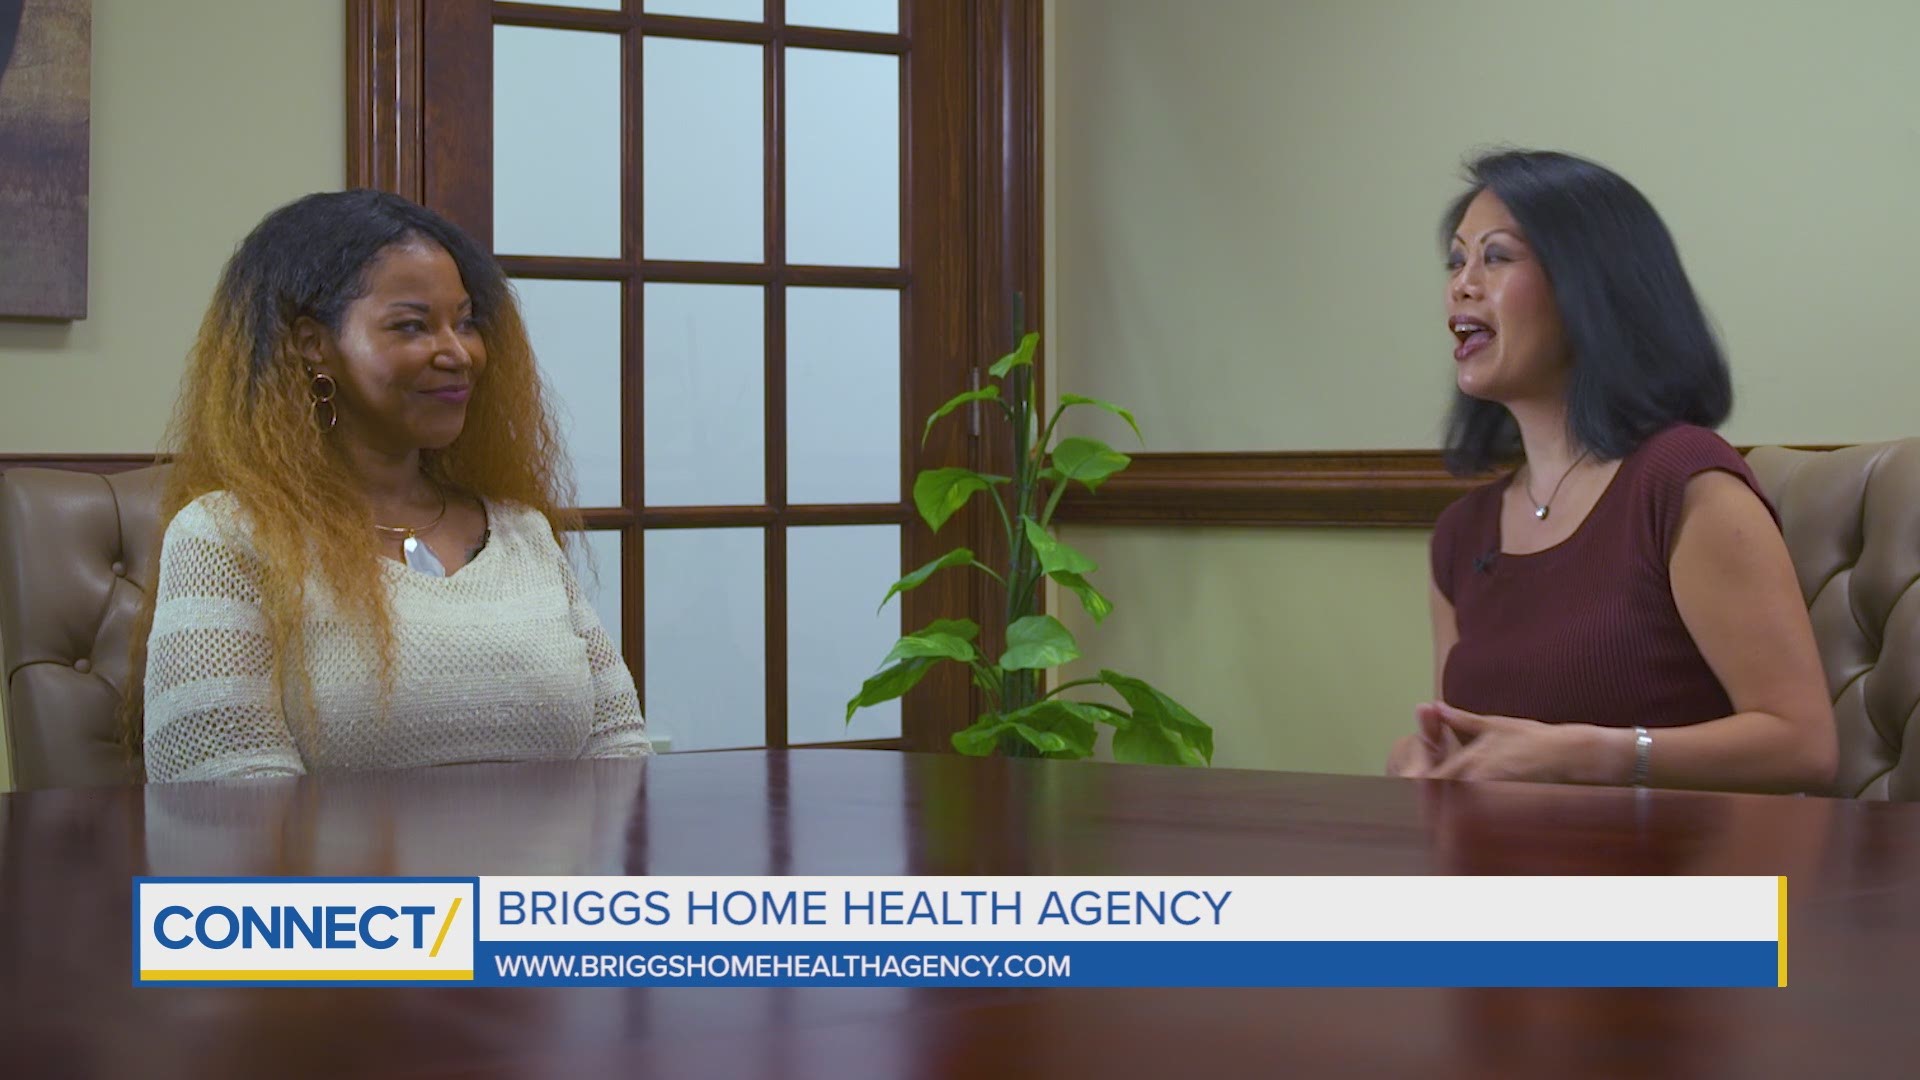 Some people aren't sure what to expect from an at-home caregiver. A nurse with Briggs Home Health Agency tells us about her job.